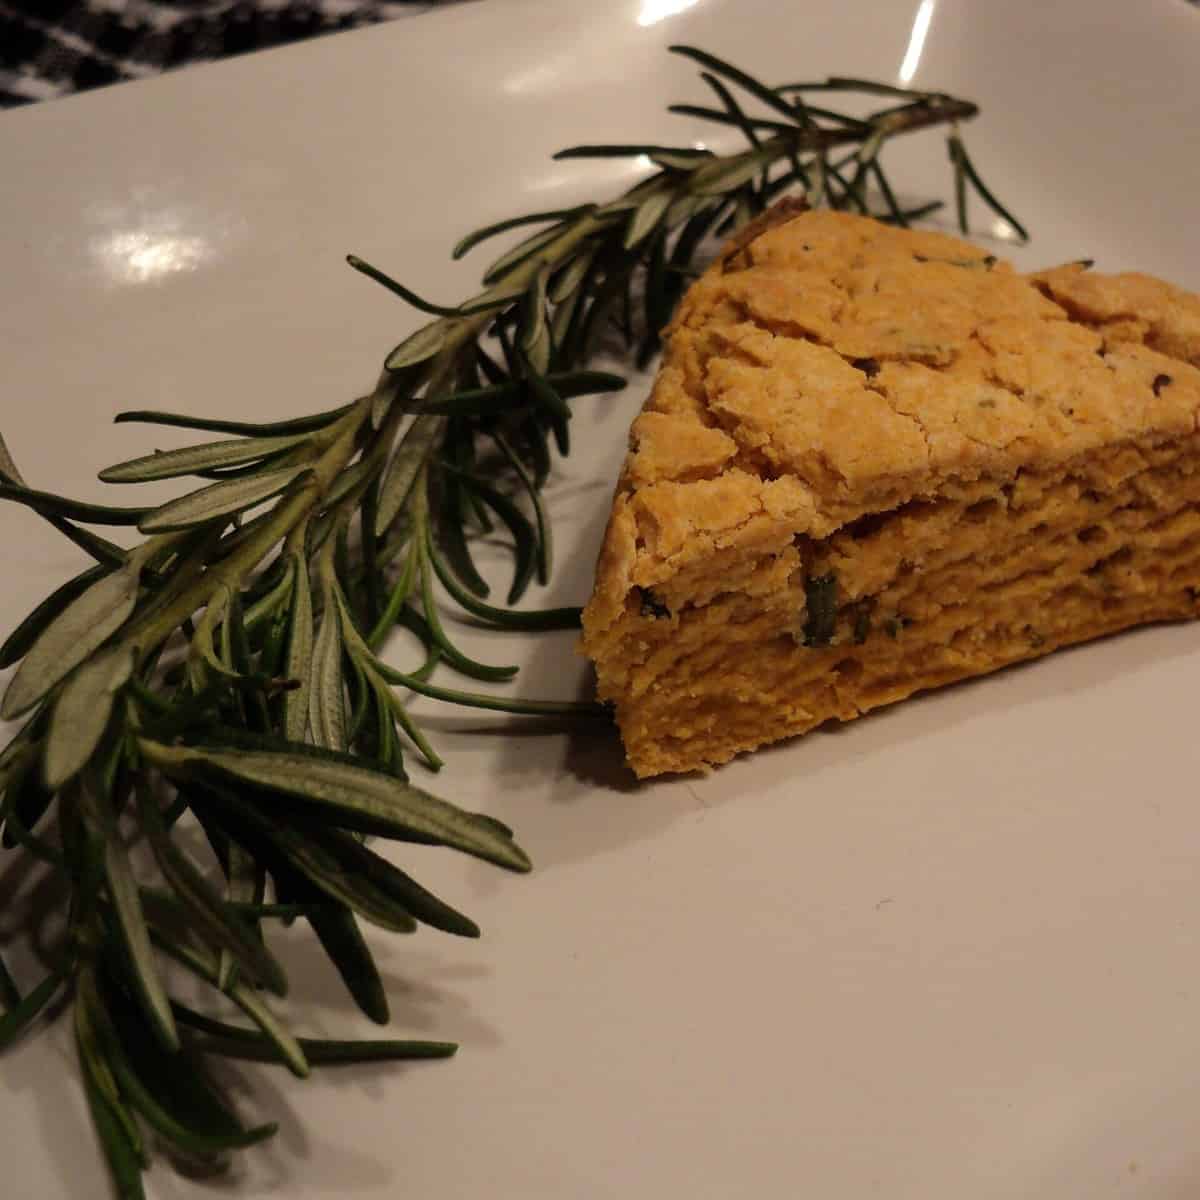  Warm, flaky scones infused with the delicious flavor of tomatoes and rosemary